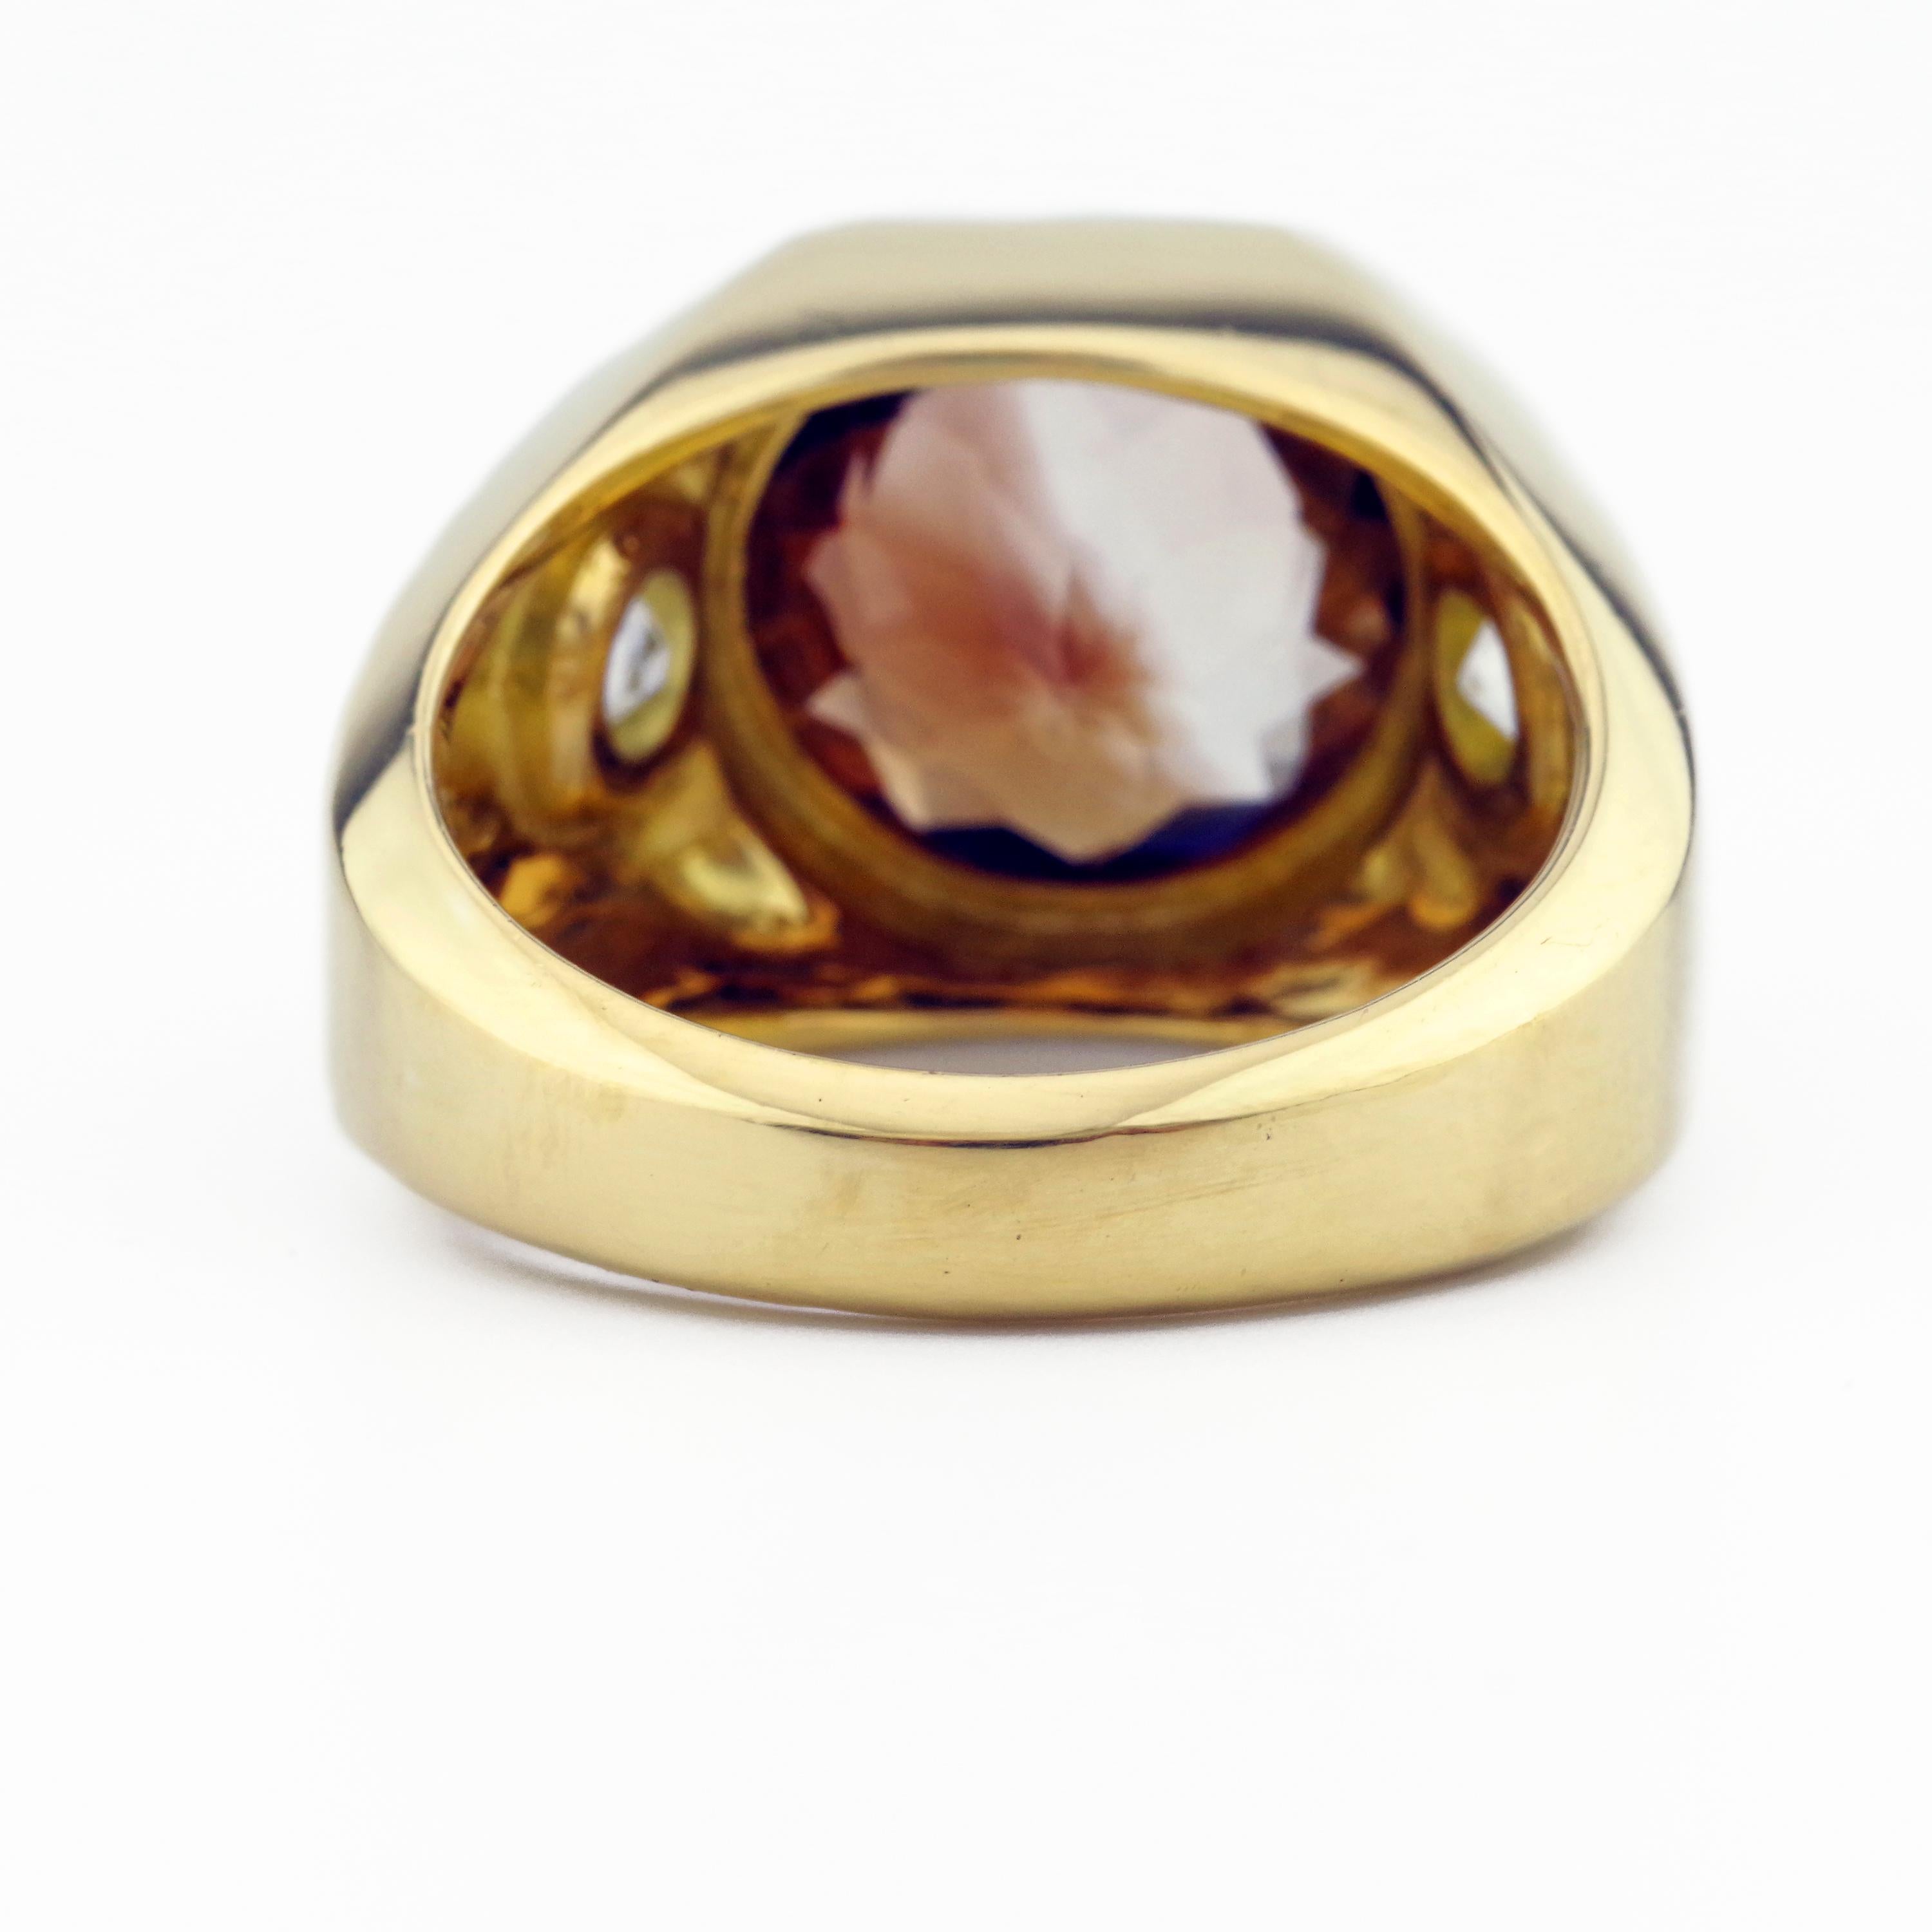 Men's Precious Topaz Ring in Whiskey is Ruggedly Handsome 2